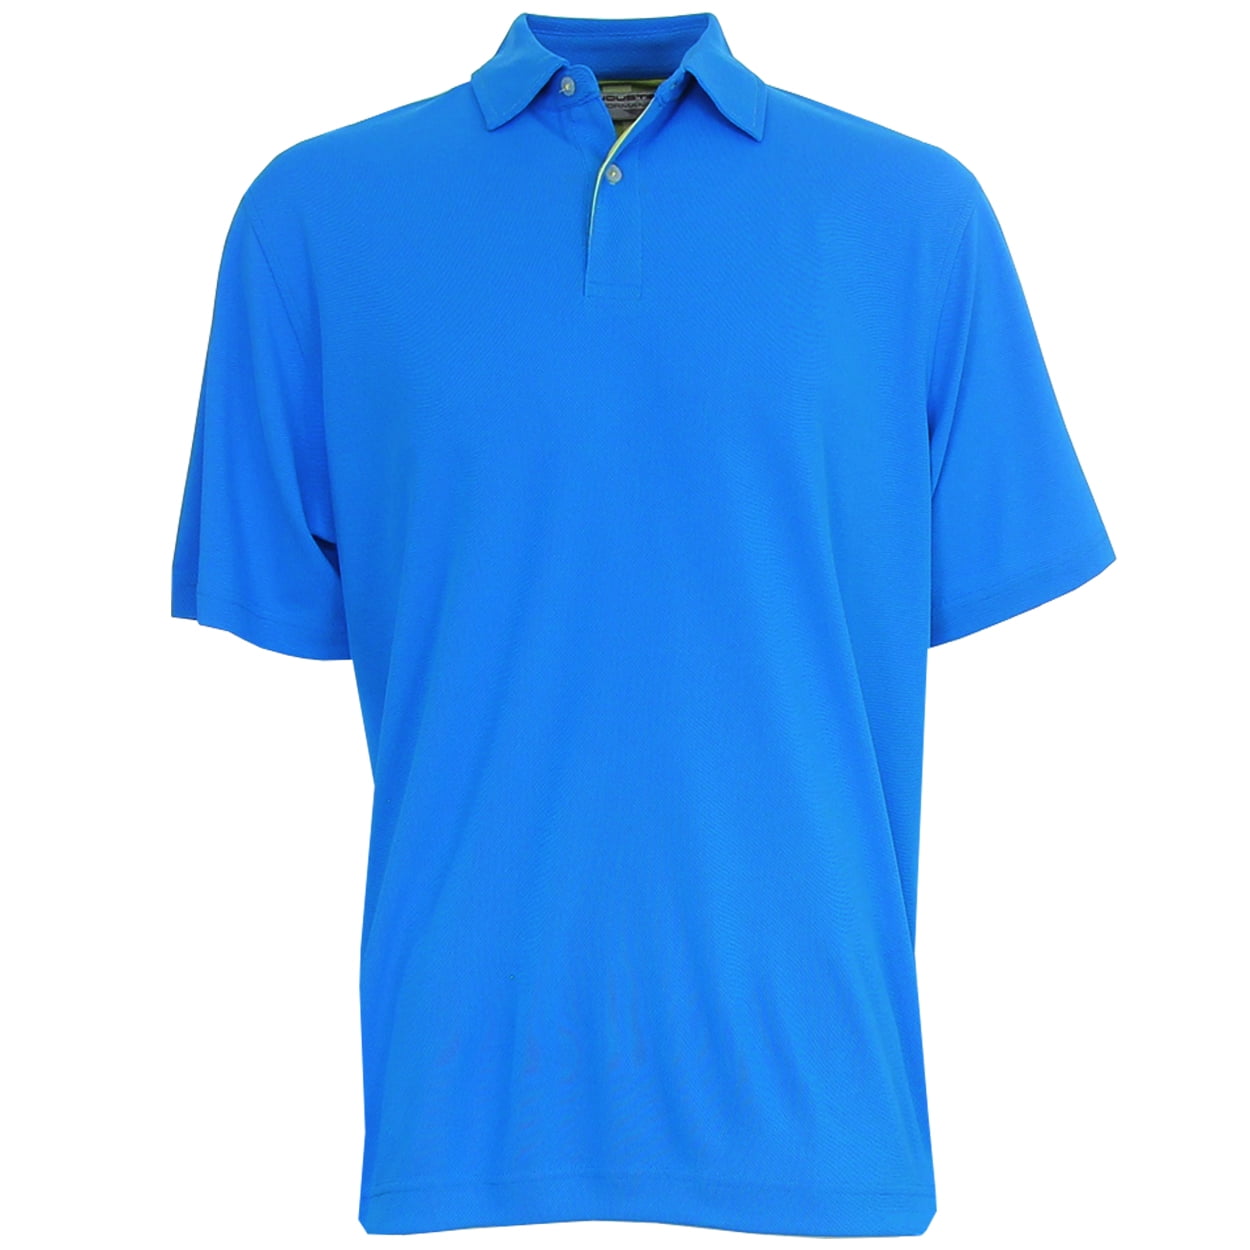 Carnoustie Performance Solid Pique Polo Golf Shirt, Brand NEW ...